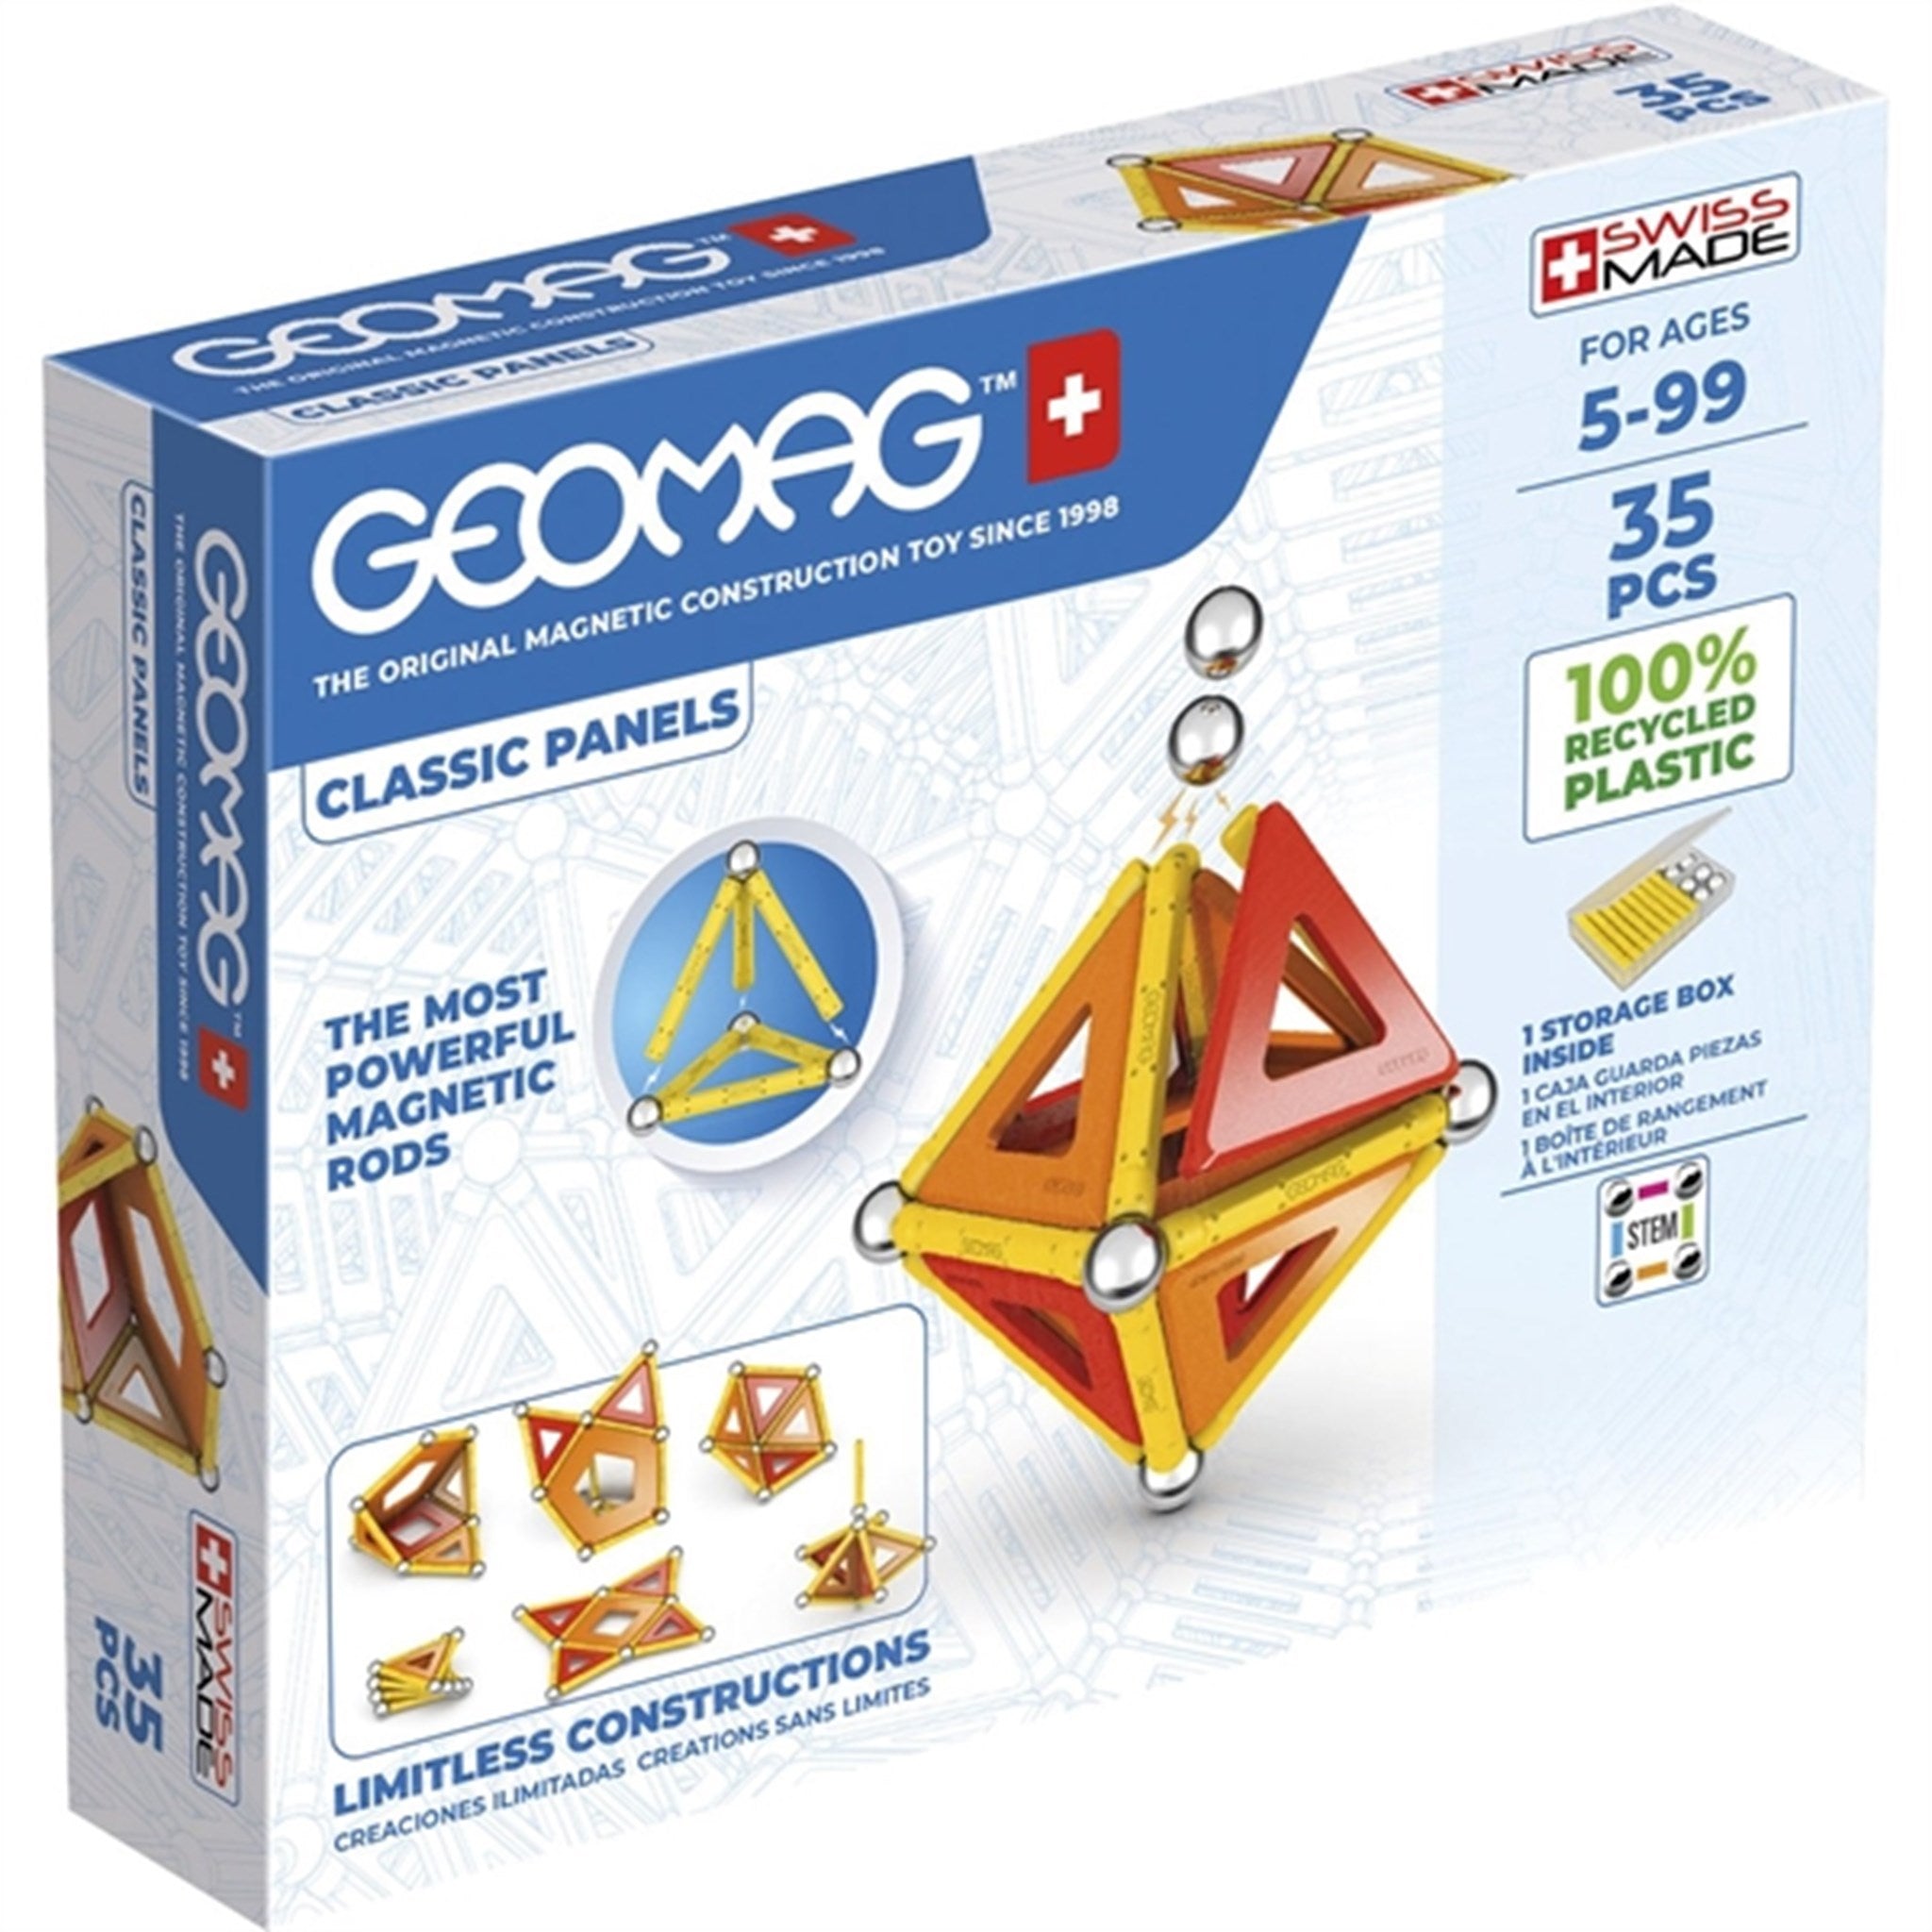 Geomag Classic Panels Recycled 35 pcs